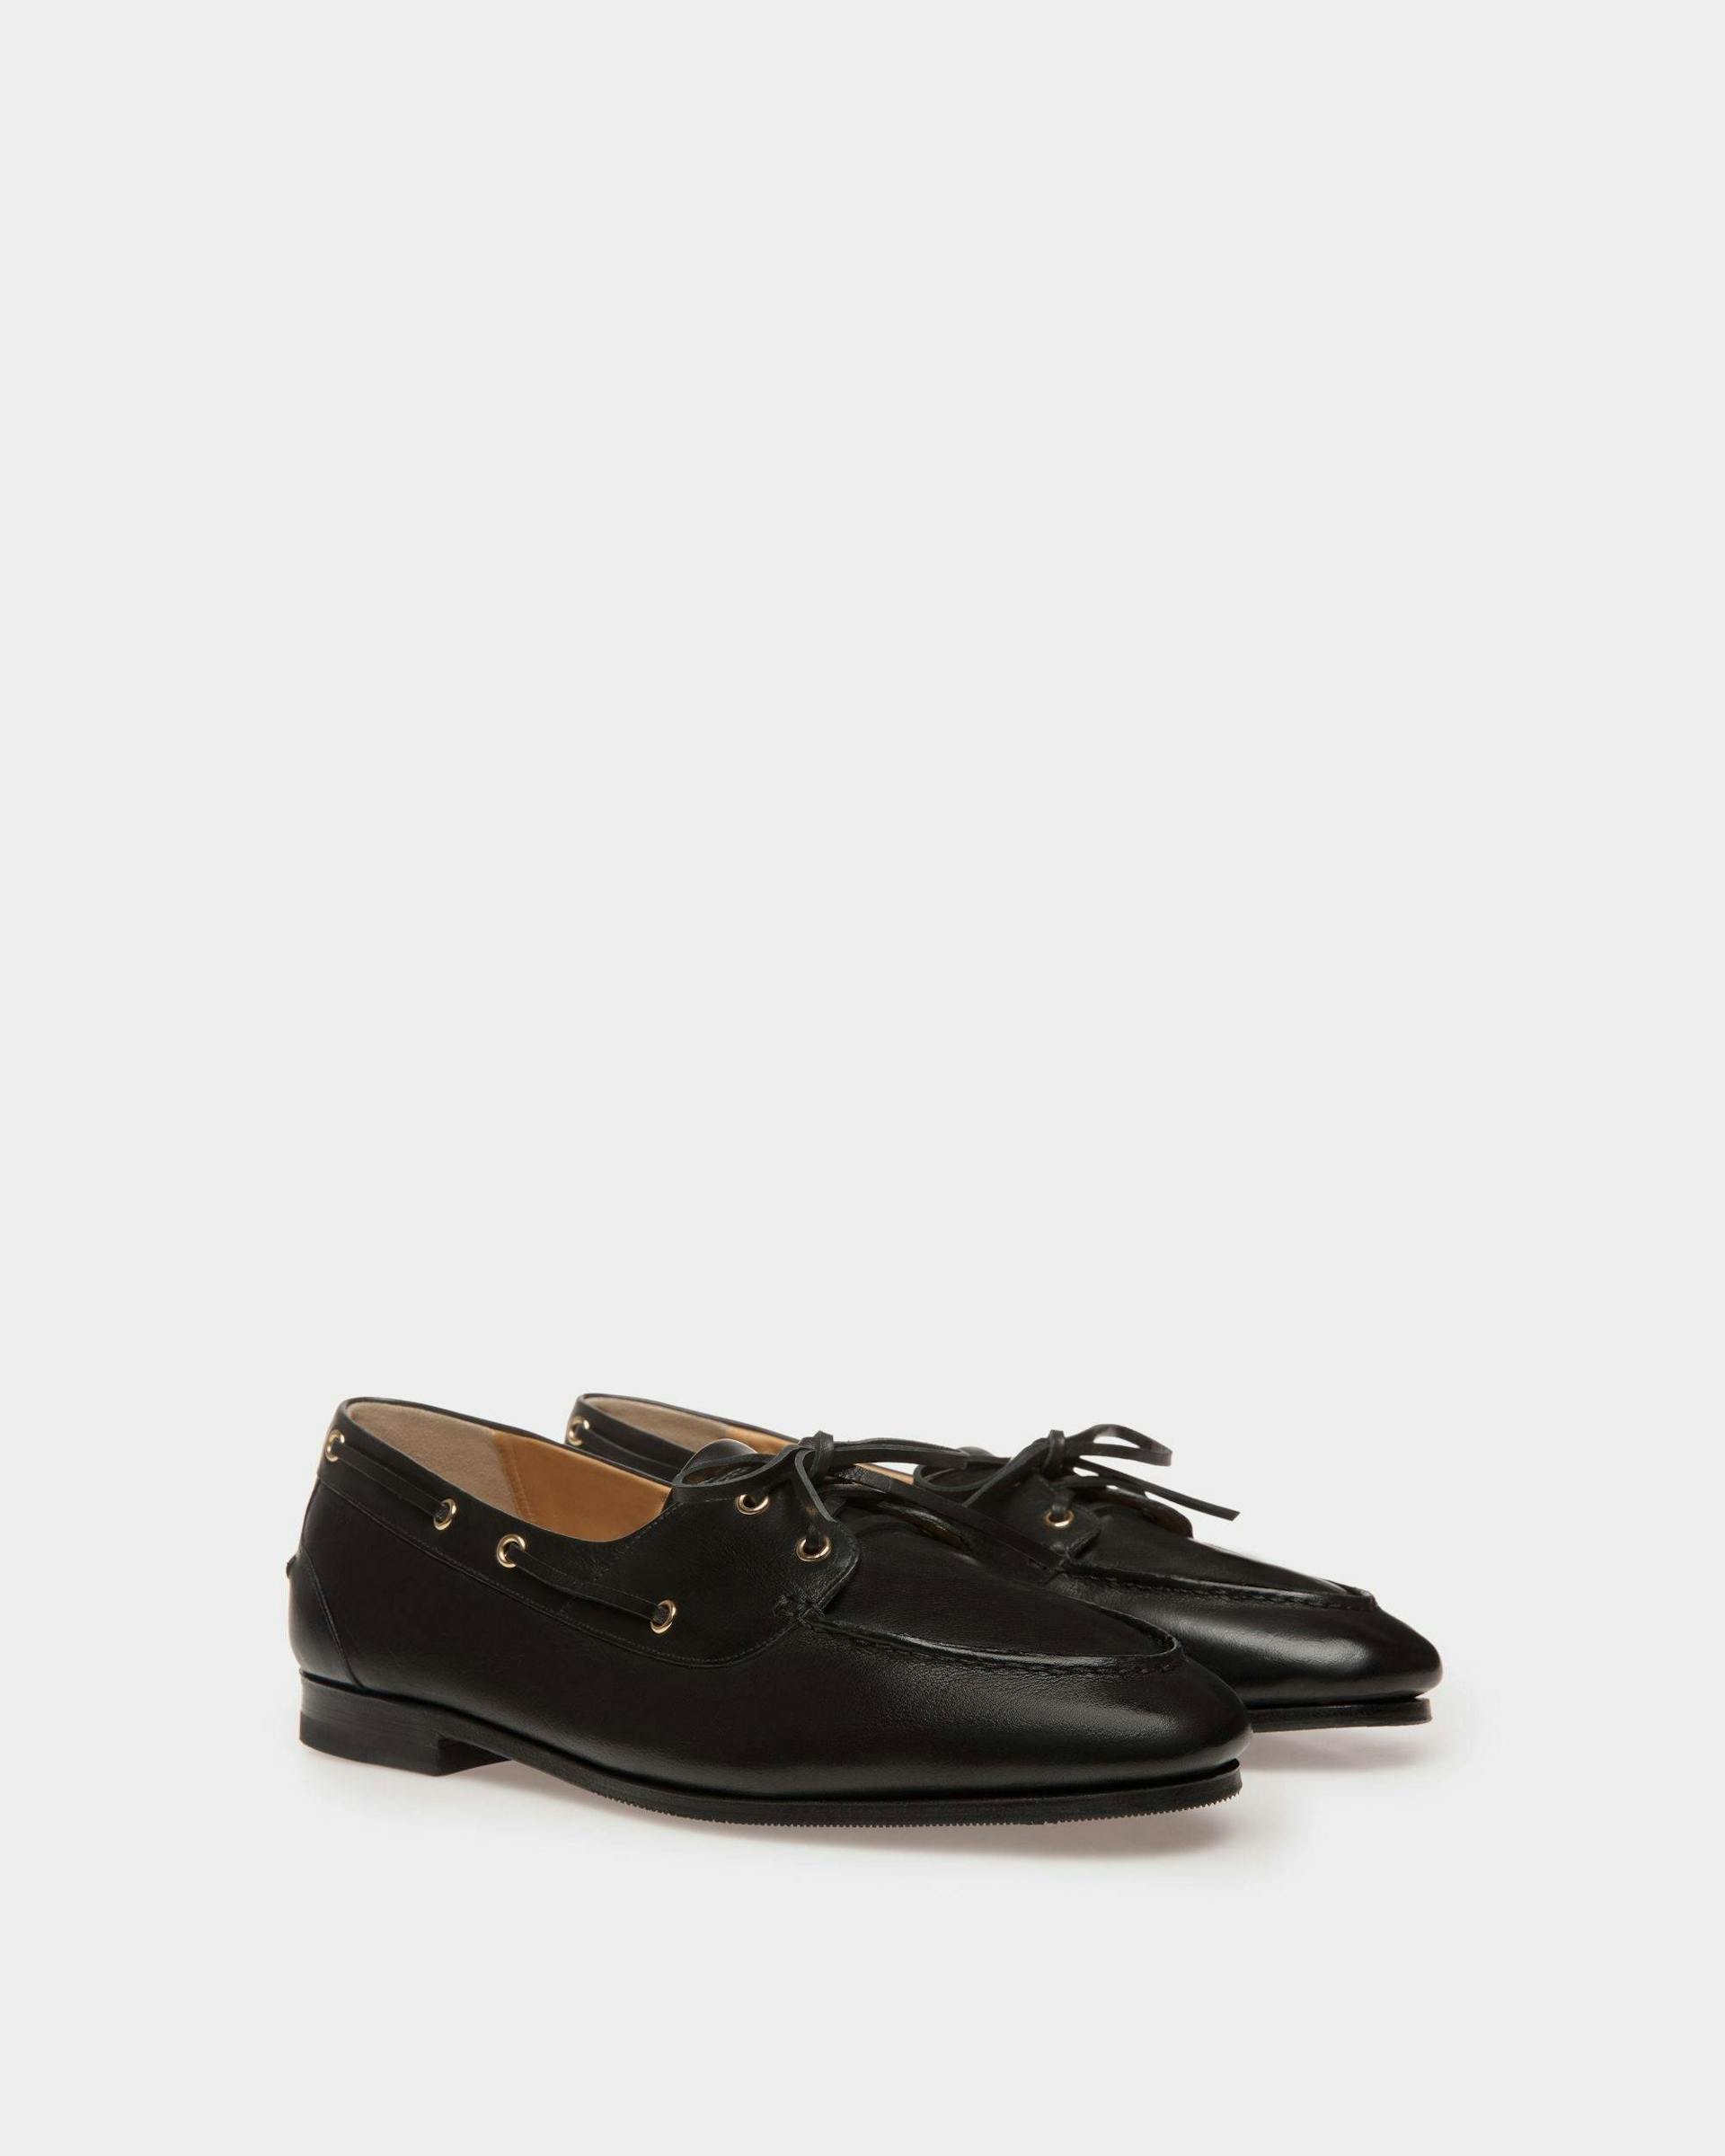 Men's Plume Moccasin in Black Leather | Bally | Still Life 3/4 Front